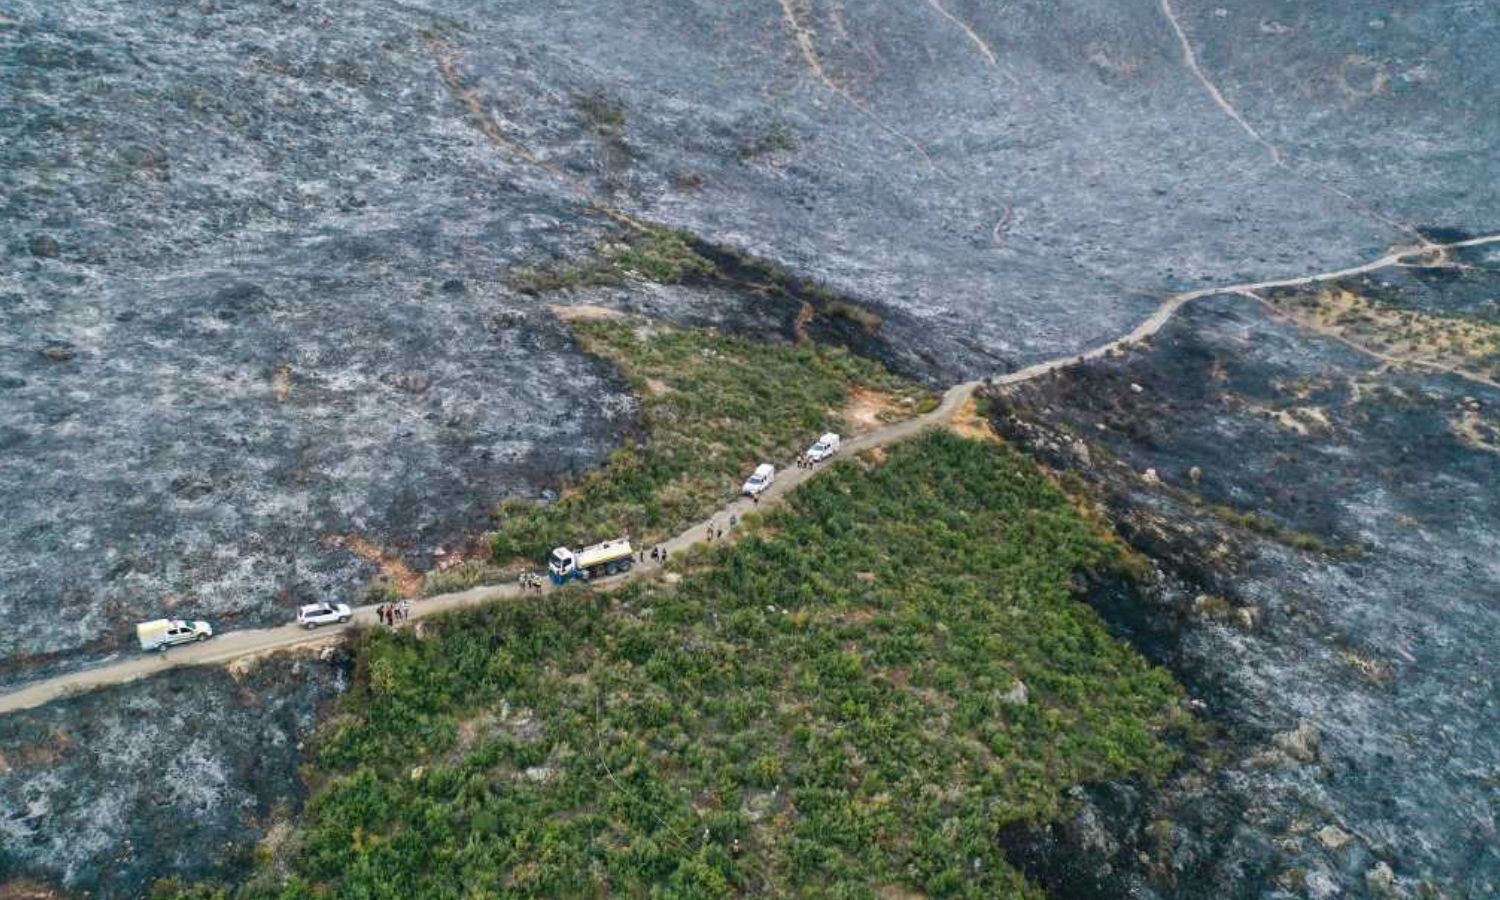 An aerial image shows members of the Syria Civil Defence battling a fire on a slope in the town of Jisr al-Shughour, west of Idlib province - September 11, 2020 (AFP)